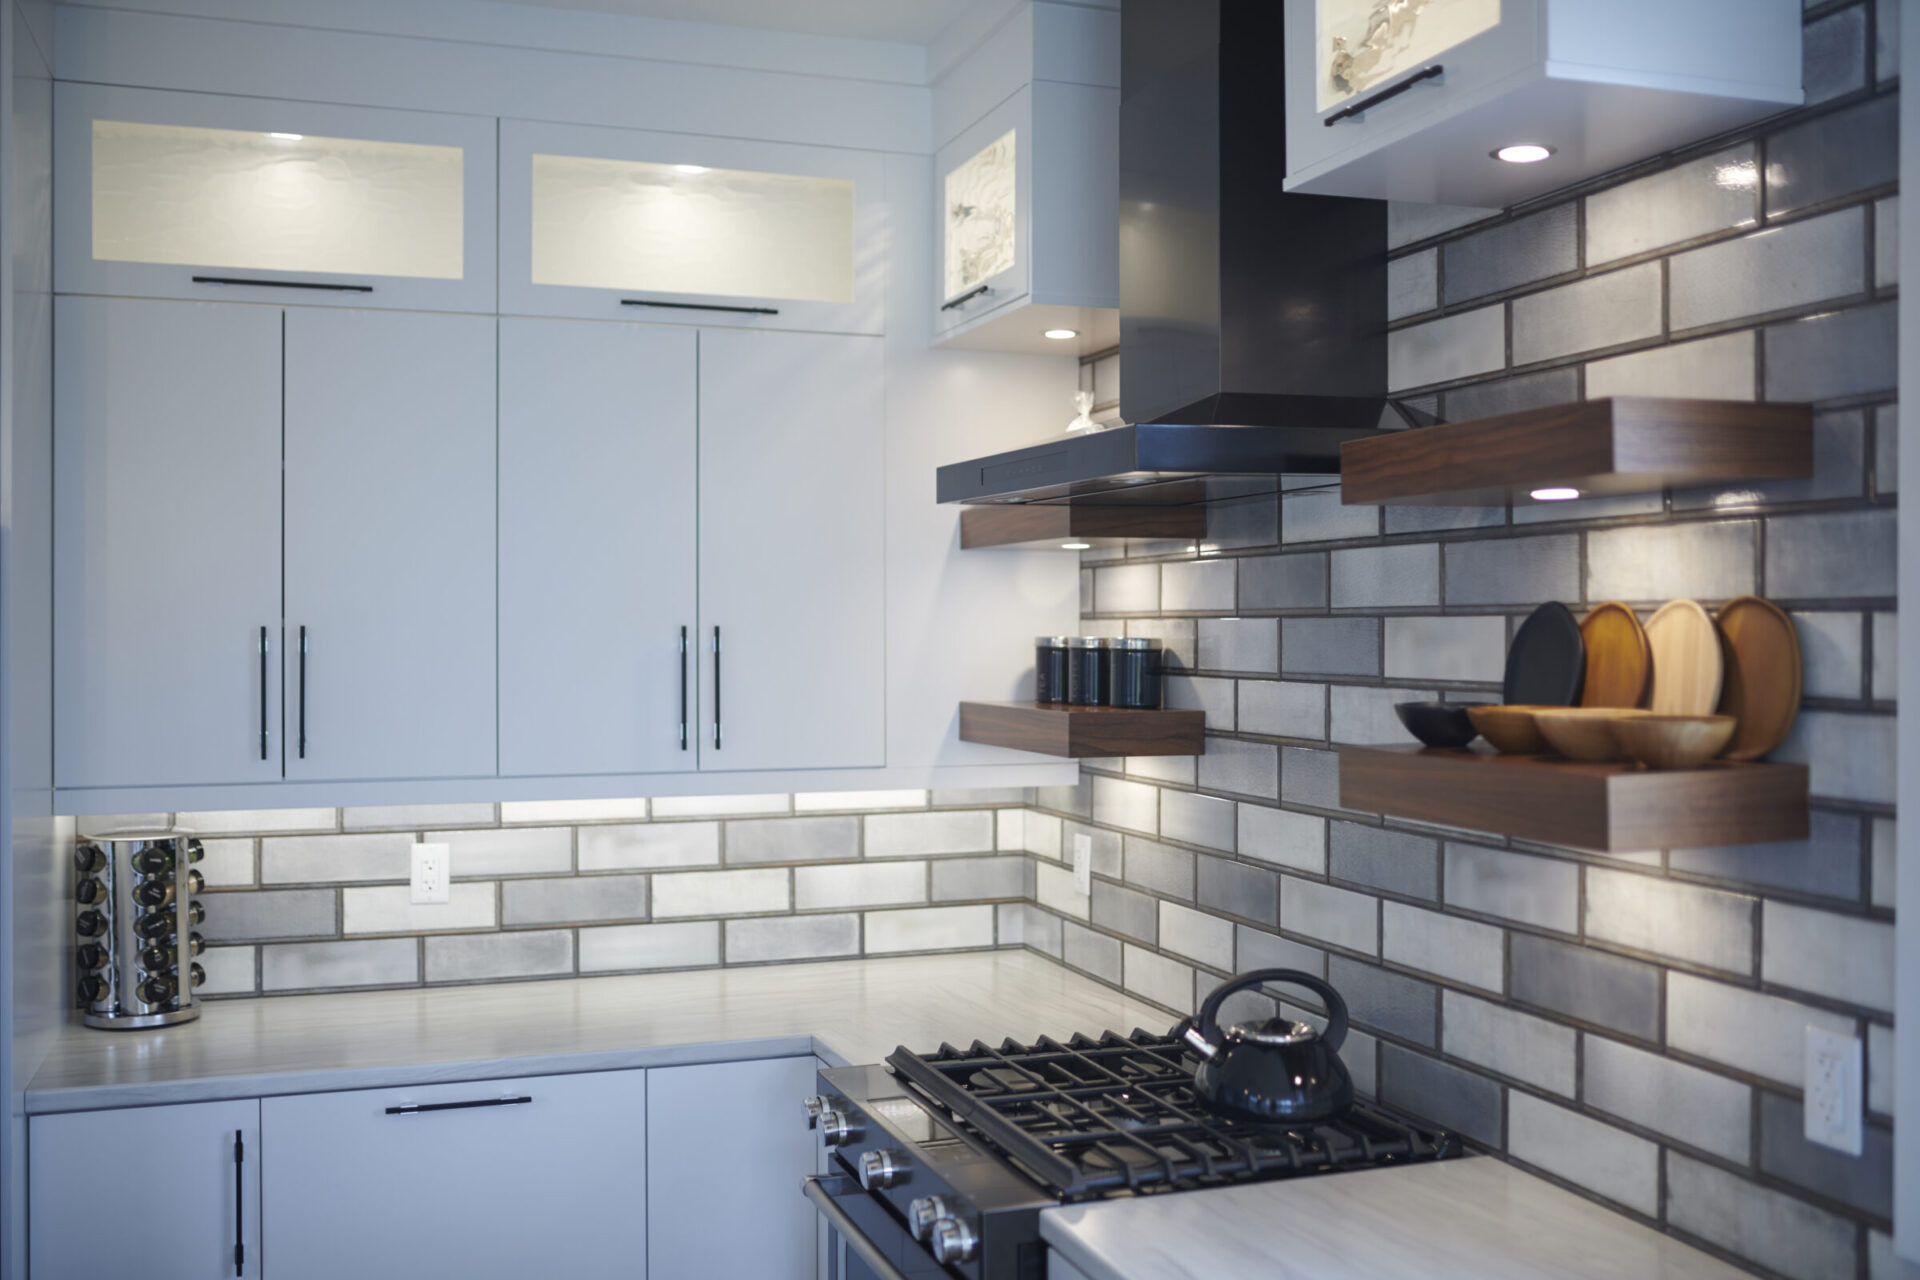 A modern kitchen interior featuring sleek gray cabinets, subway tile backsplash, stainless steel gas stove, wooden shelves, and a black vent hood.